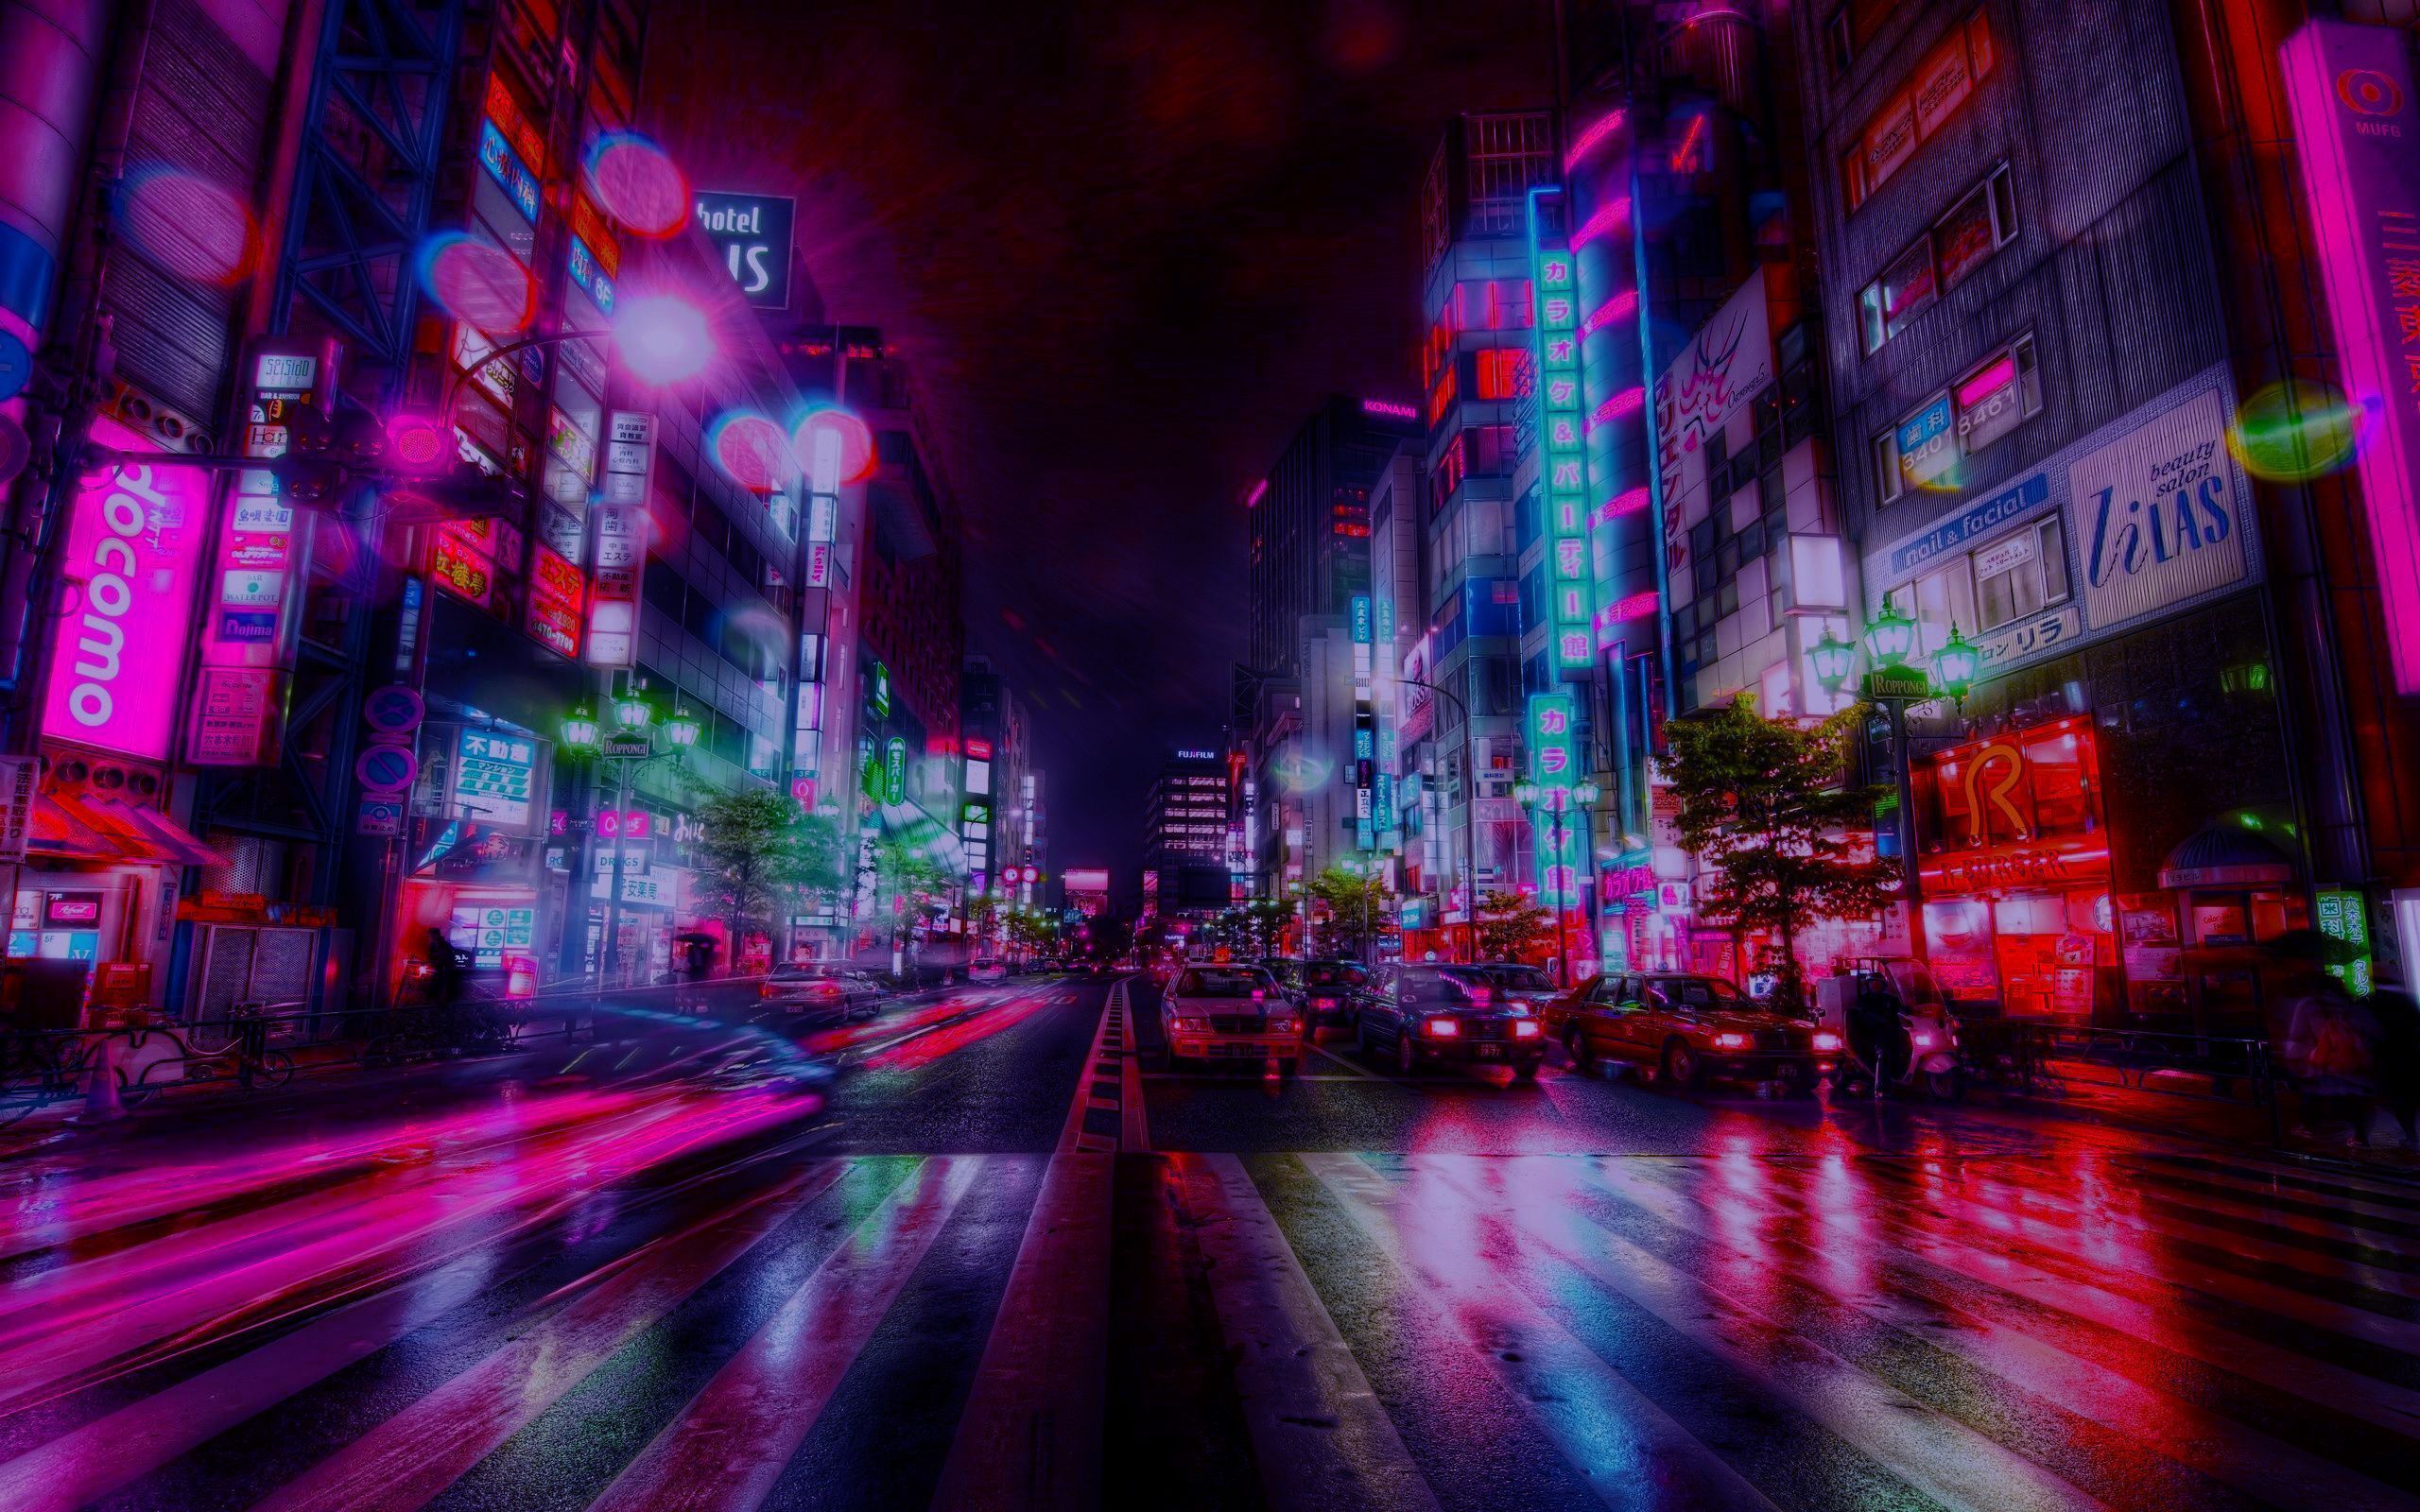 A city street at night with neon lights and traffic - Tokyo